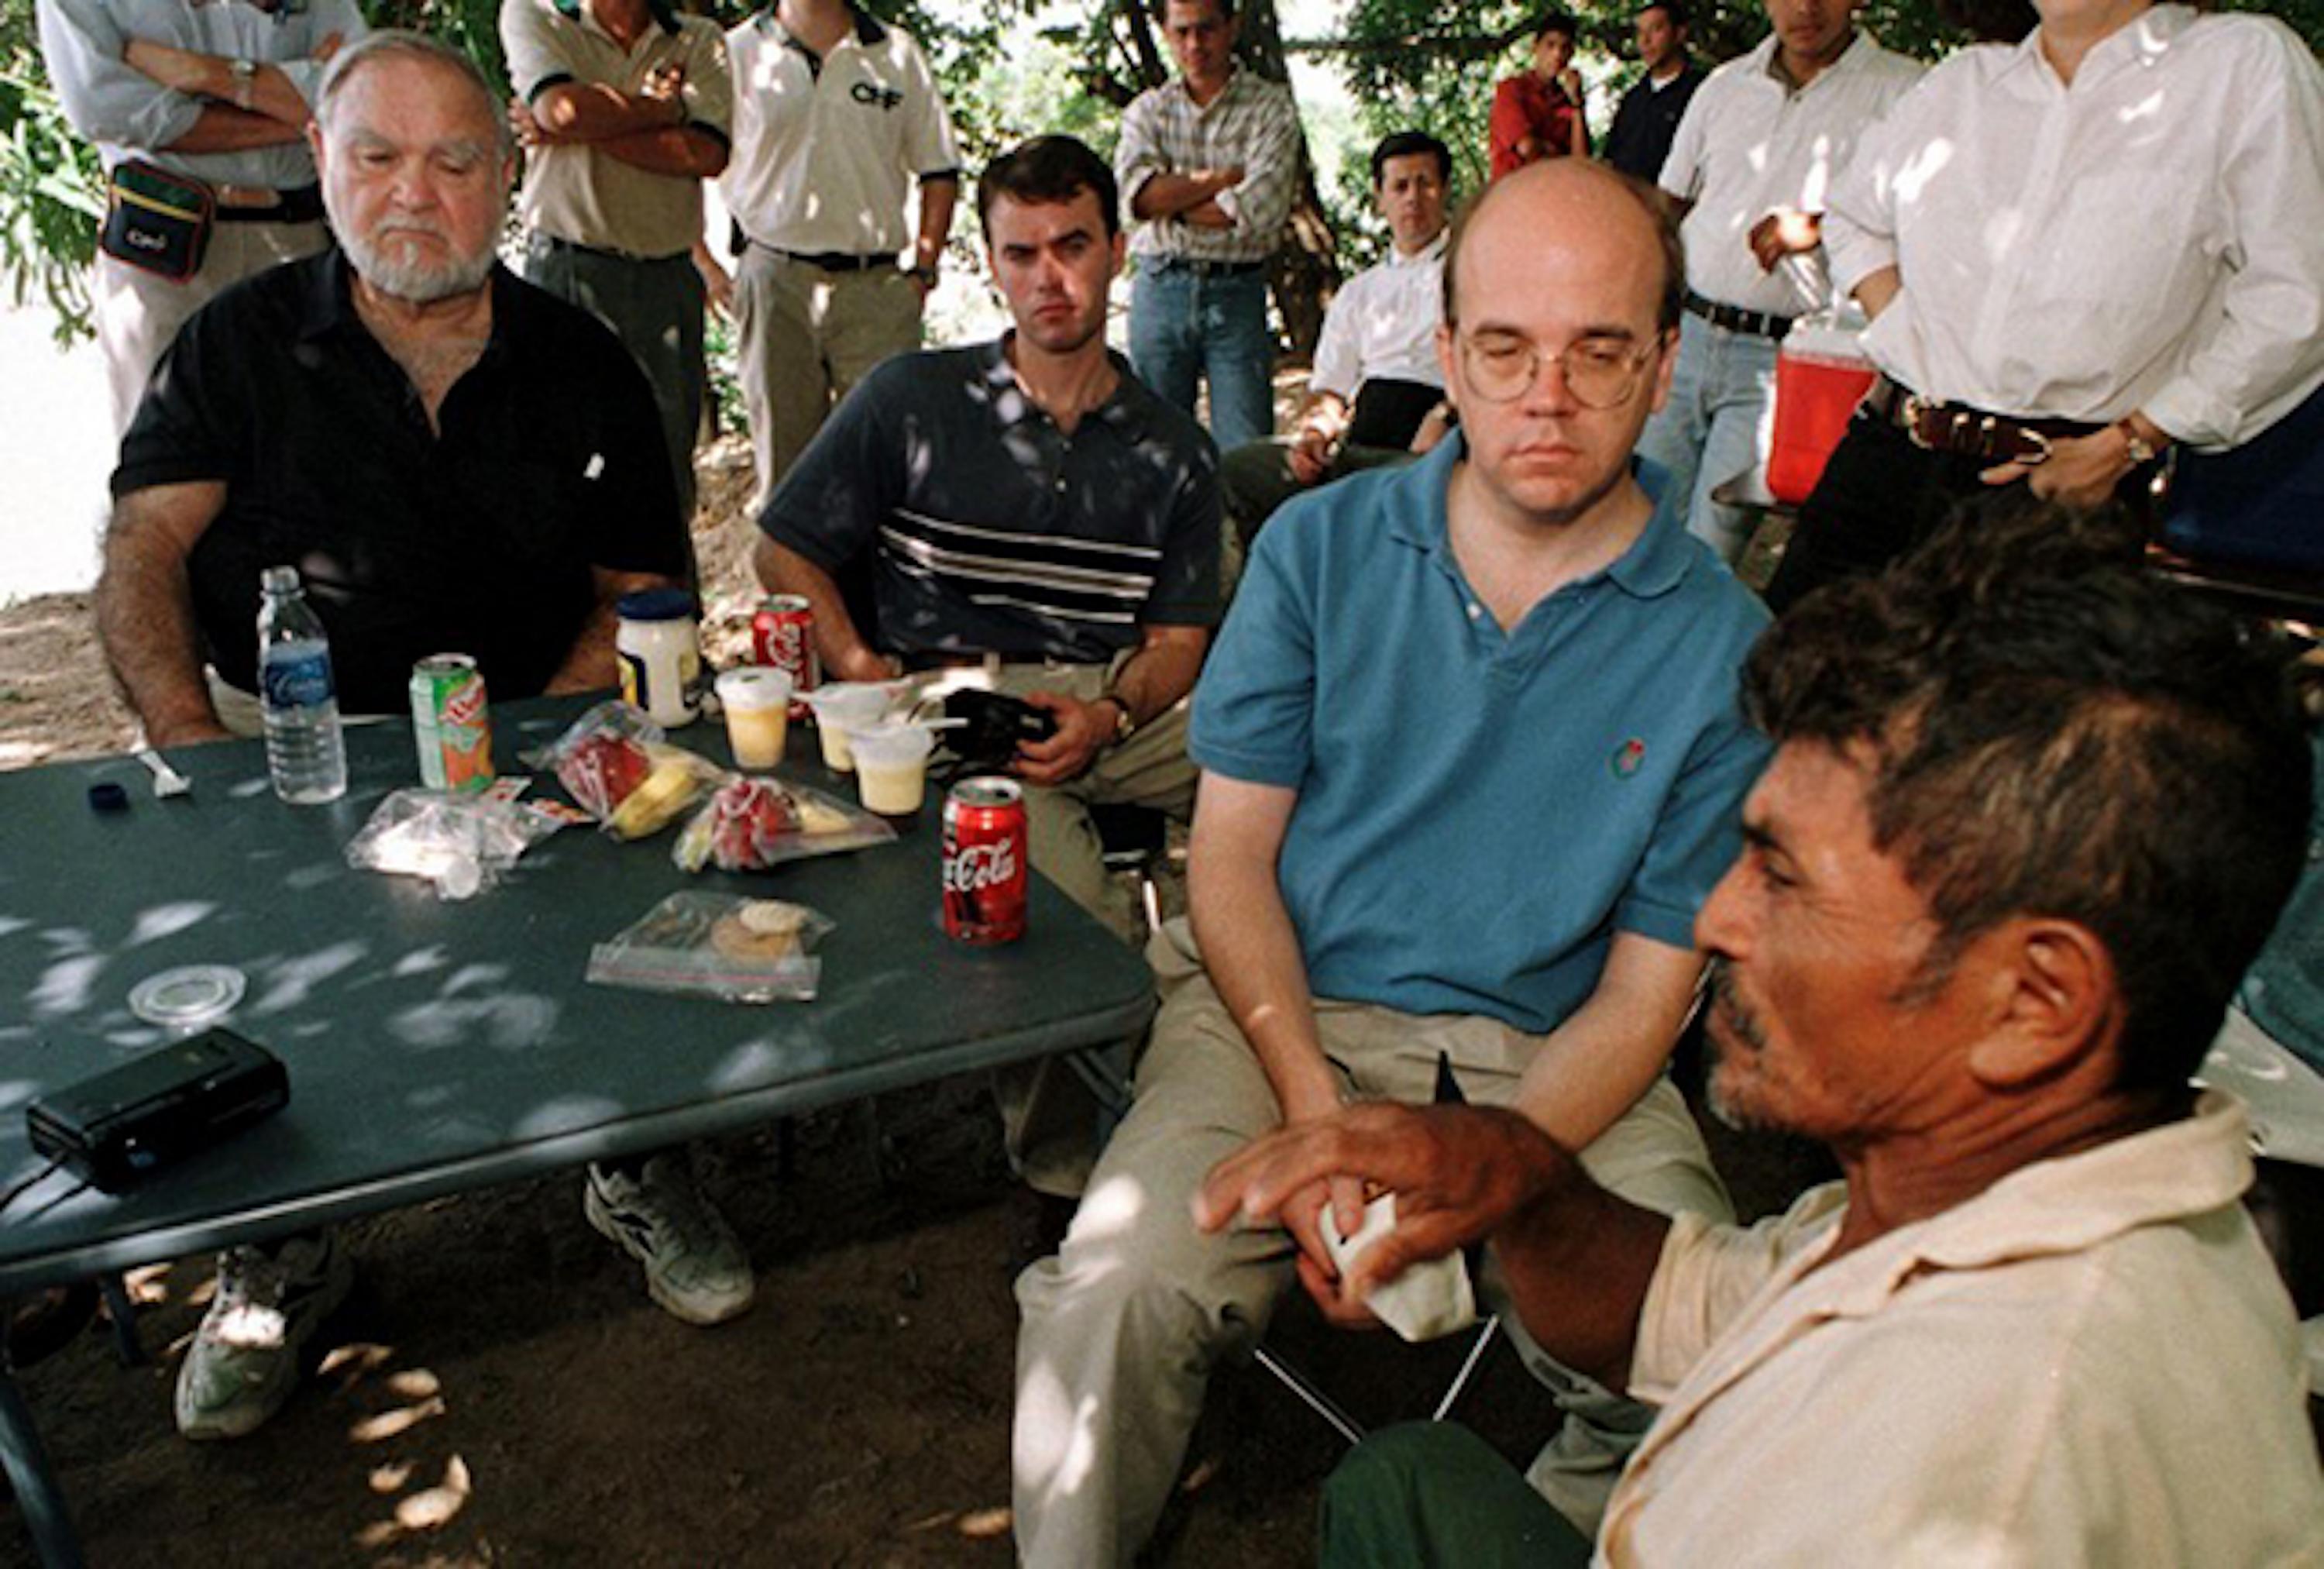 Massachusetts congressmen Joseph Moakley (left) and Jim McGovern (second to the right) during a visit in 2000 to the Bajo Lempa, El Salvador, regarding relief projects set up for communities affected by Hurricane Mitch. Photo Yuri Cortez/AFP